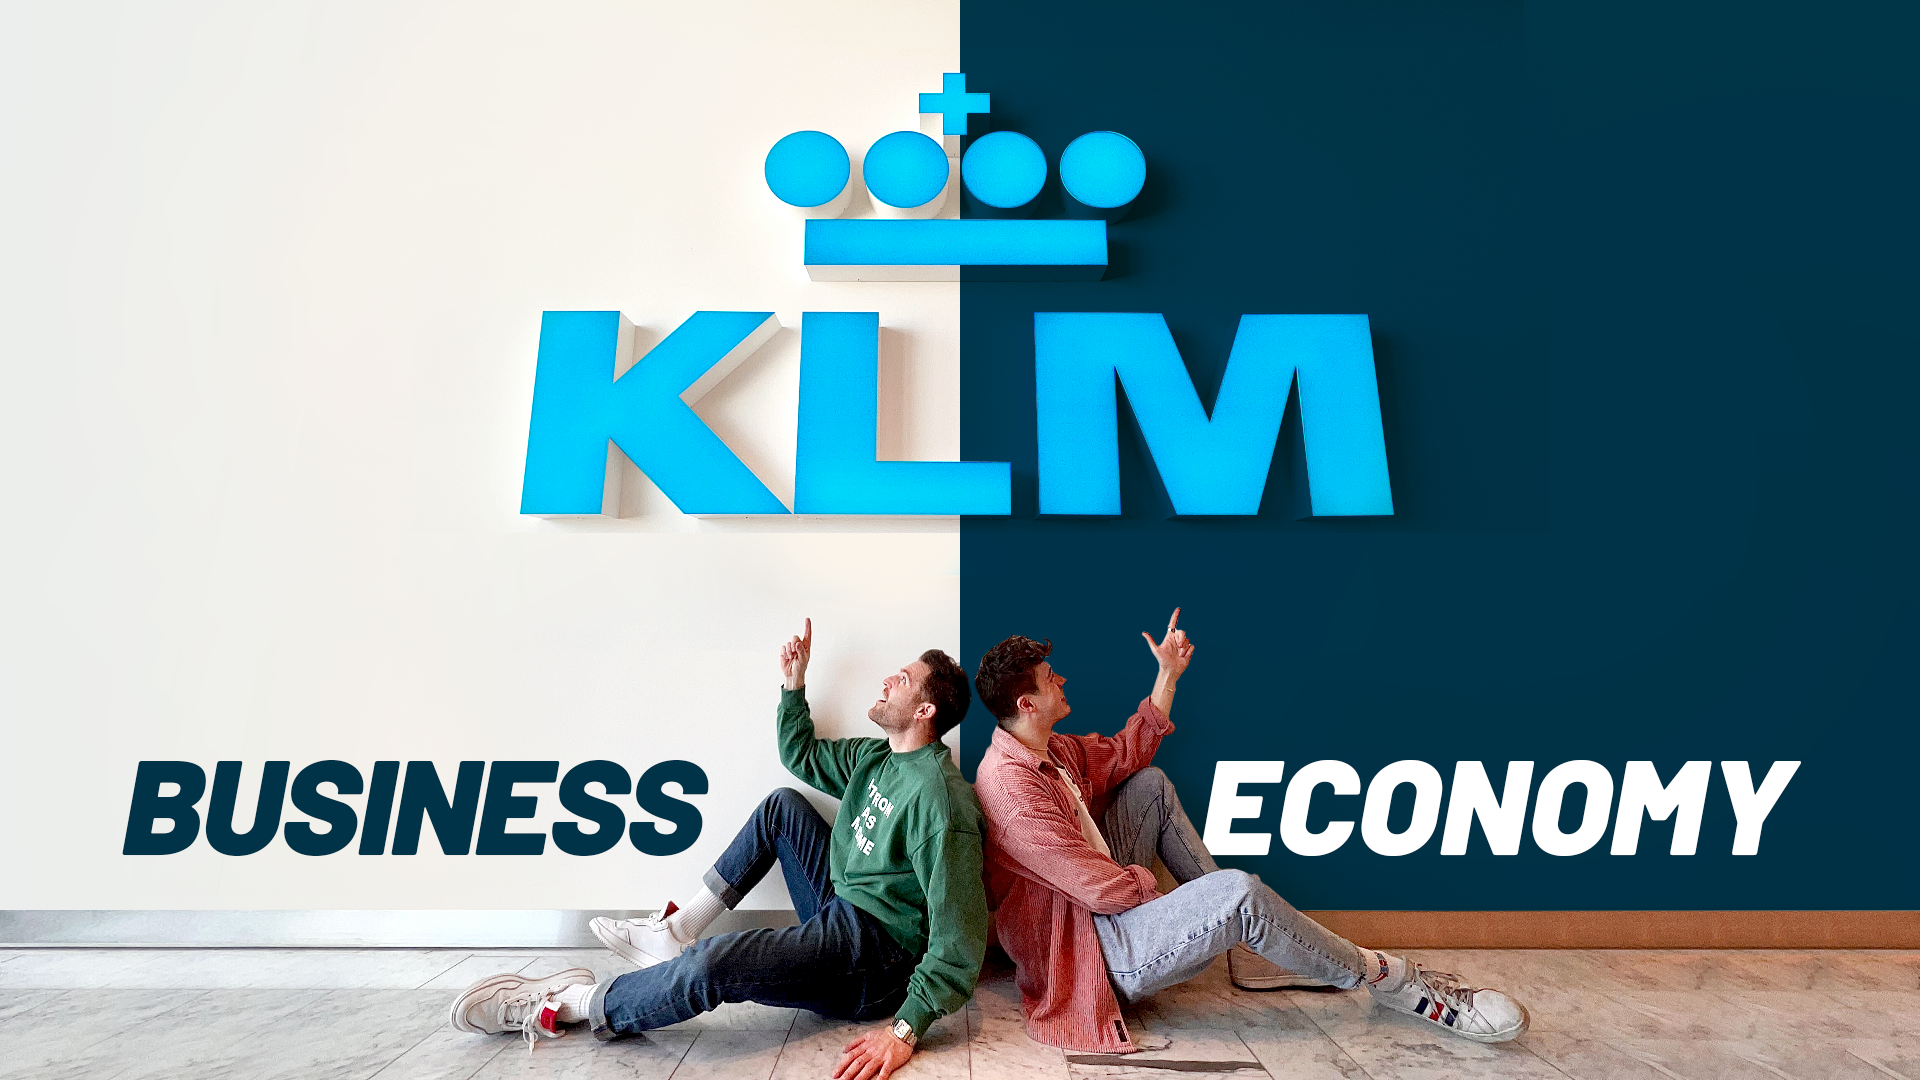 Watch TPG UK fly KLM 2 different ways